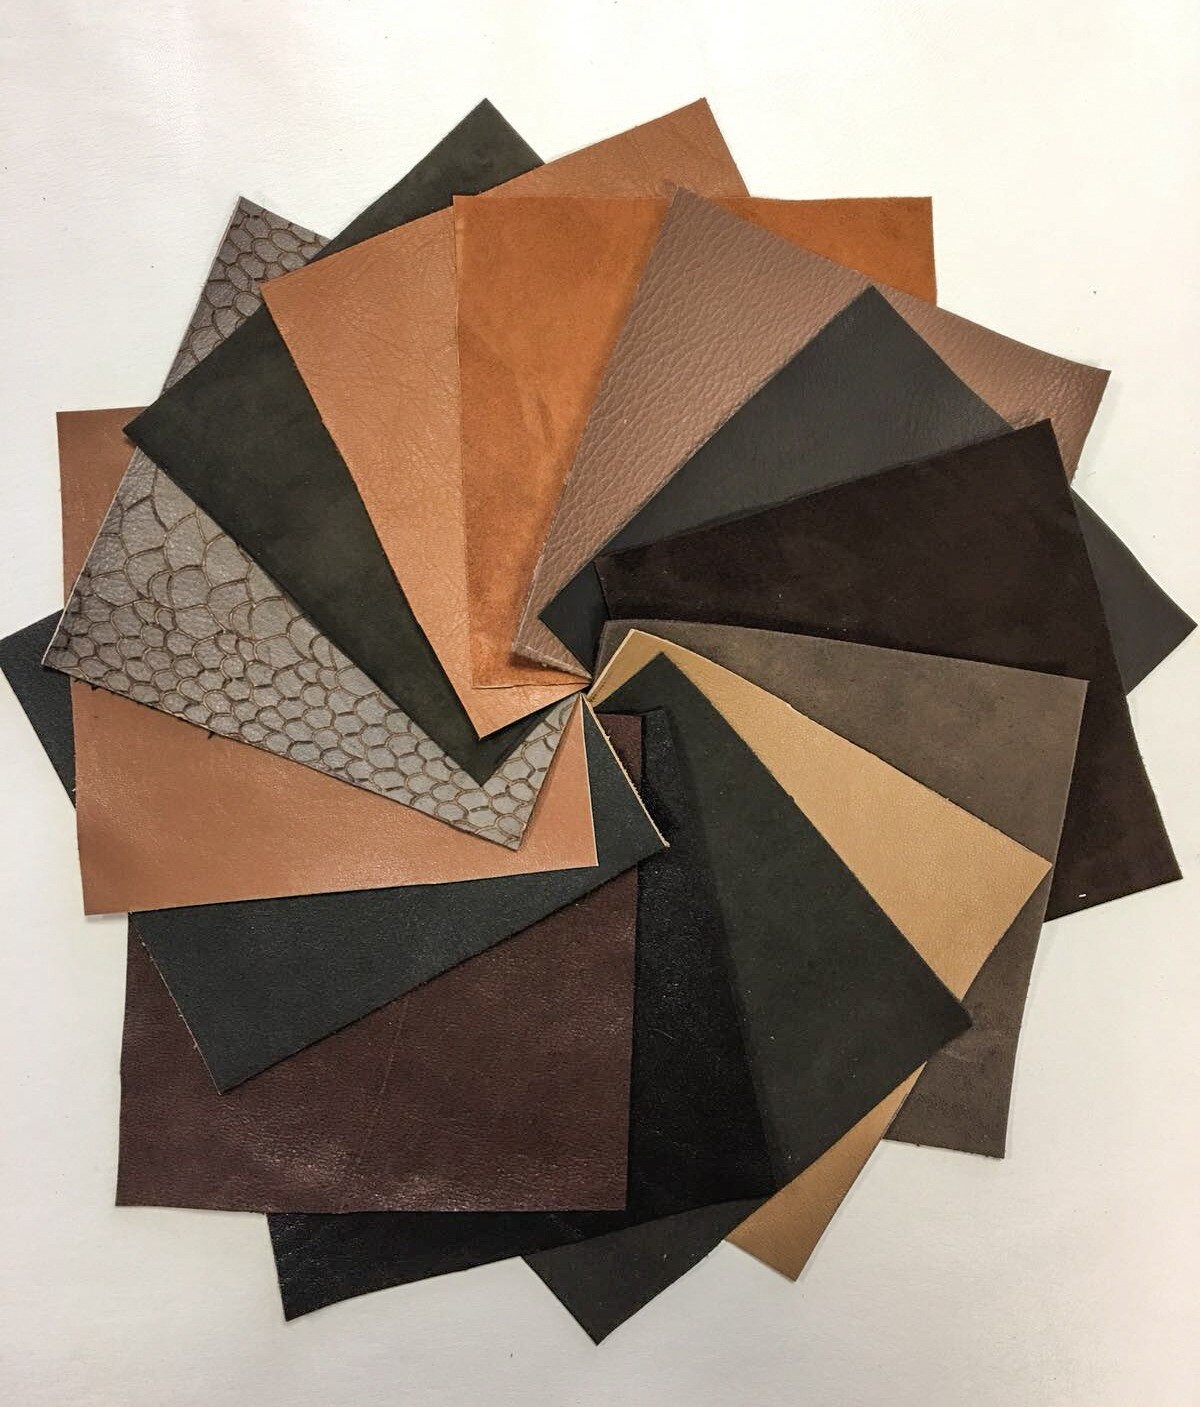 BROWN SHADES Leather Scraps Real Leather Pre Cut Sheet Set 5x5 Inch Craft  Pieces Textured Various Brown Leather Samples 4/8pieces per Pack 